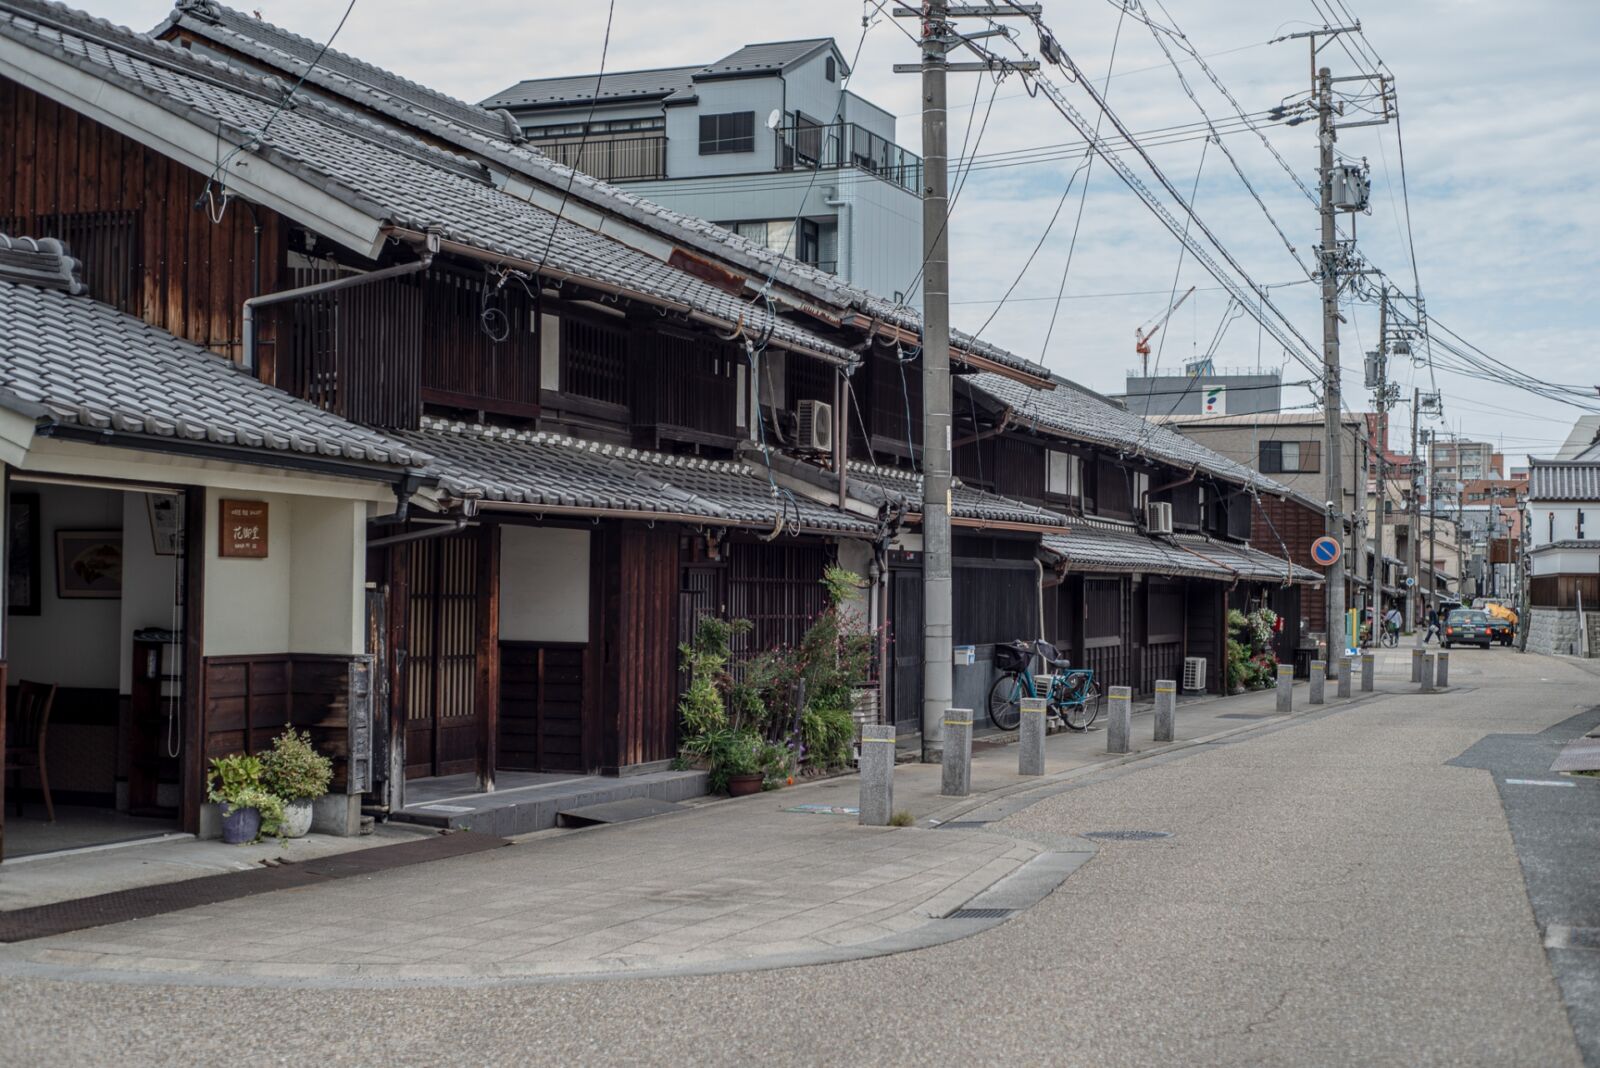 Shigemichi Townscape is a well preserved Edo-era district in Nagoya.